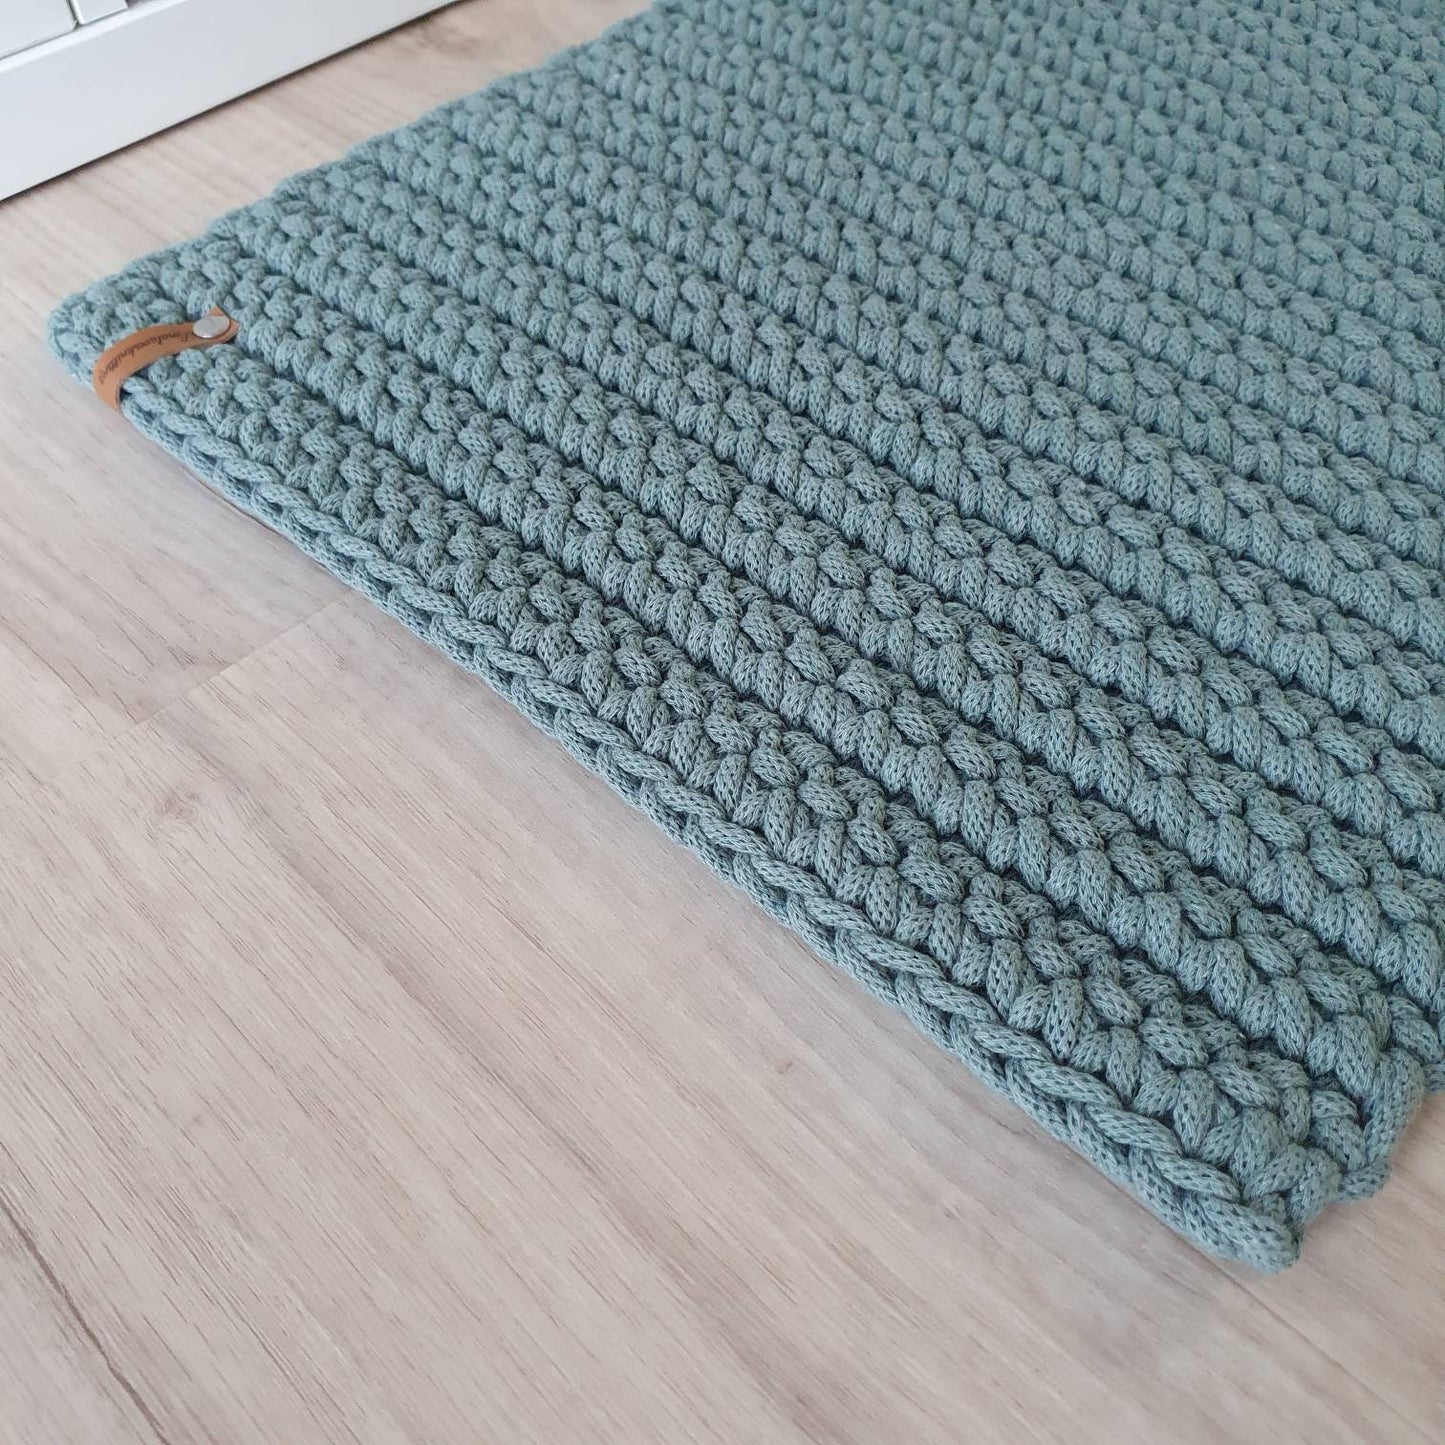 Crocheted rug made from 100% recycled cotton